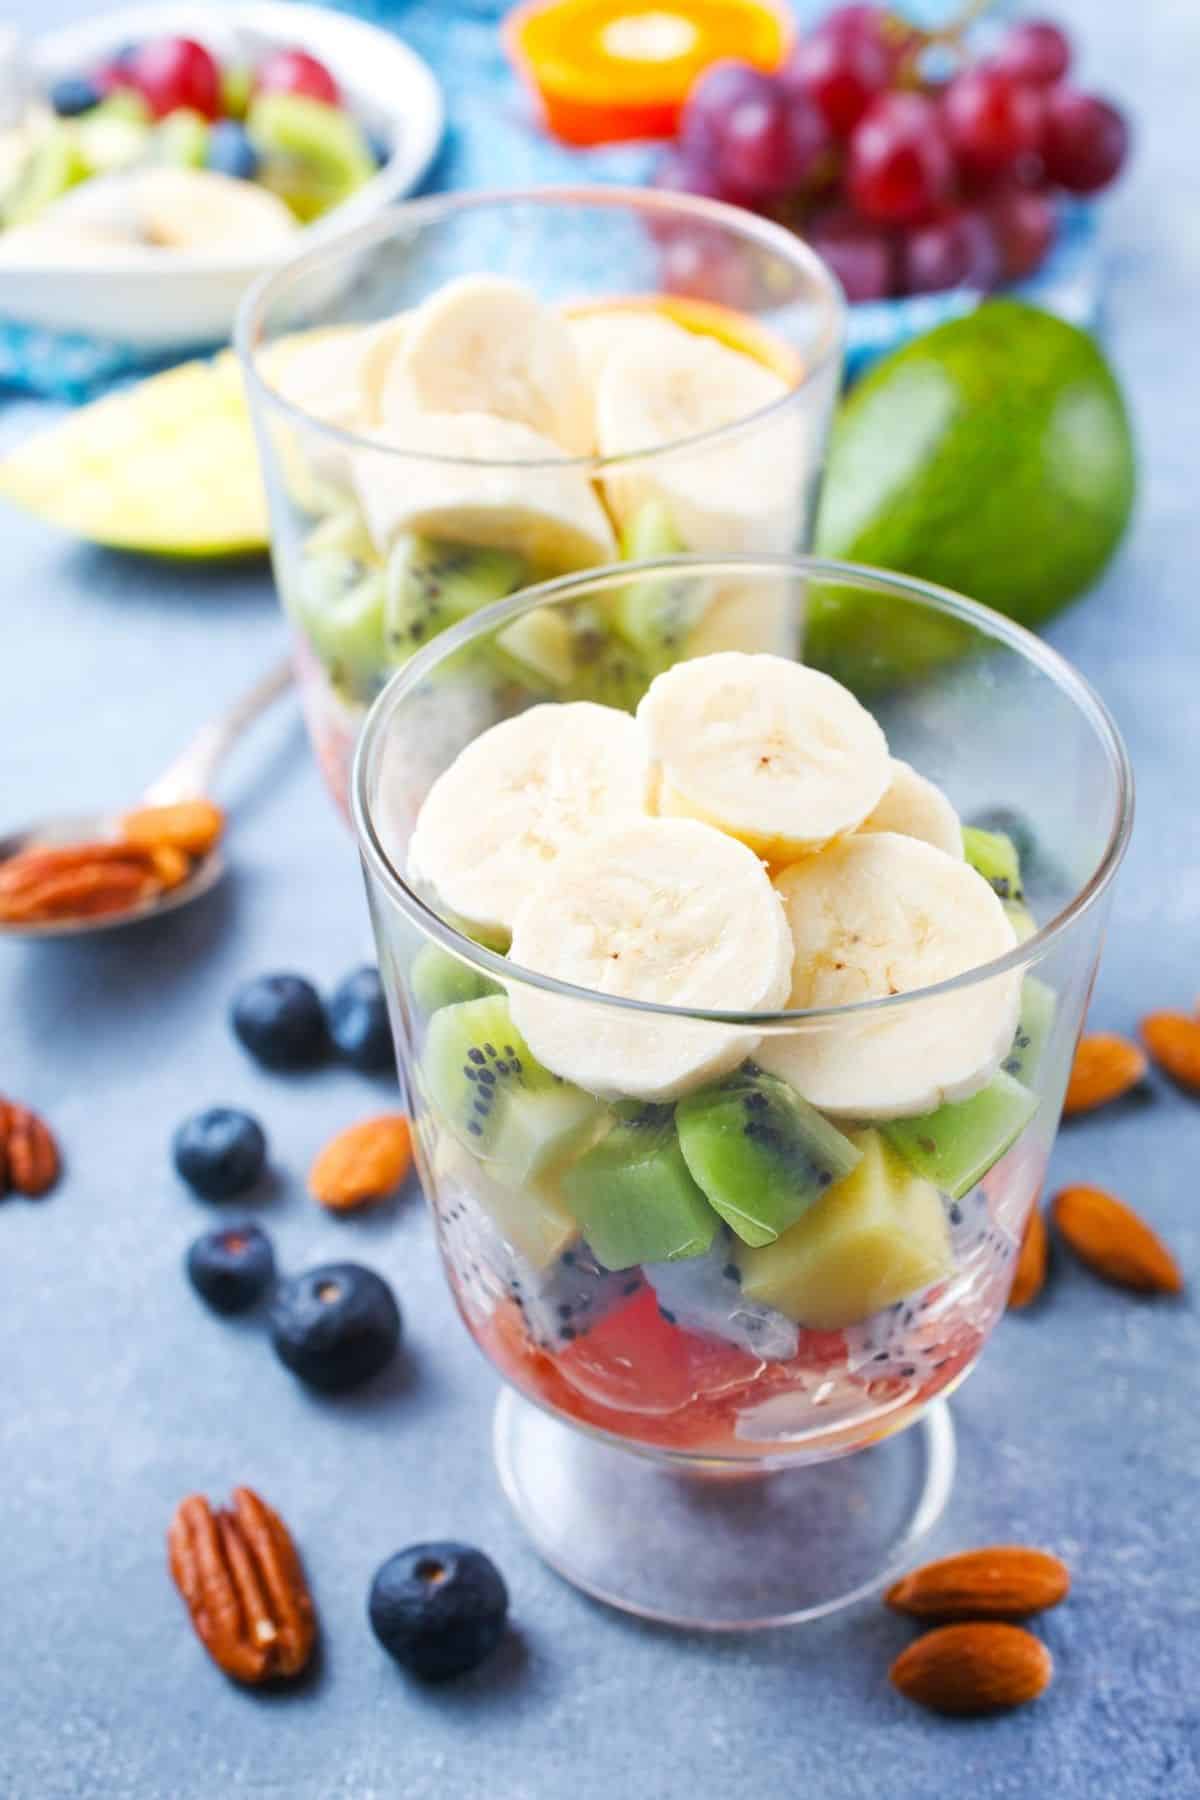 collection of fresh fruits in parfait glasses.